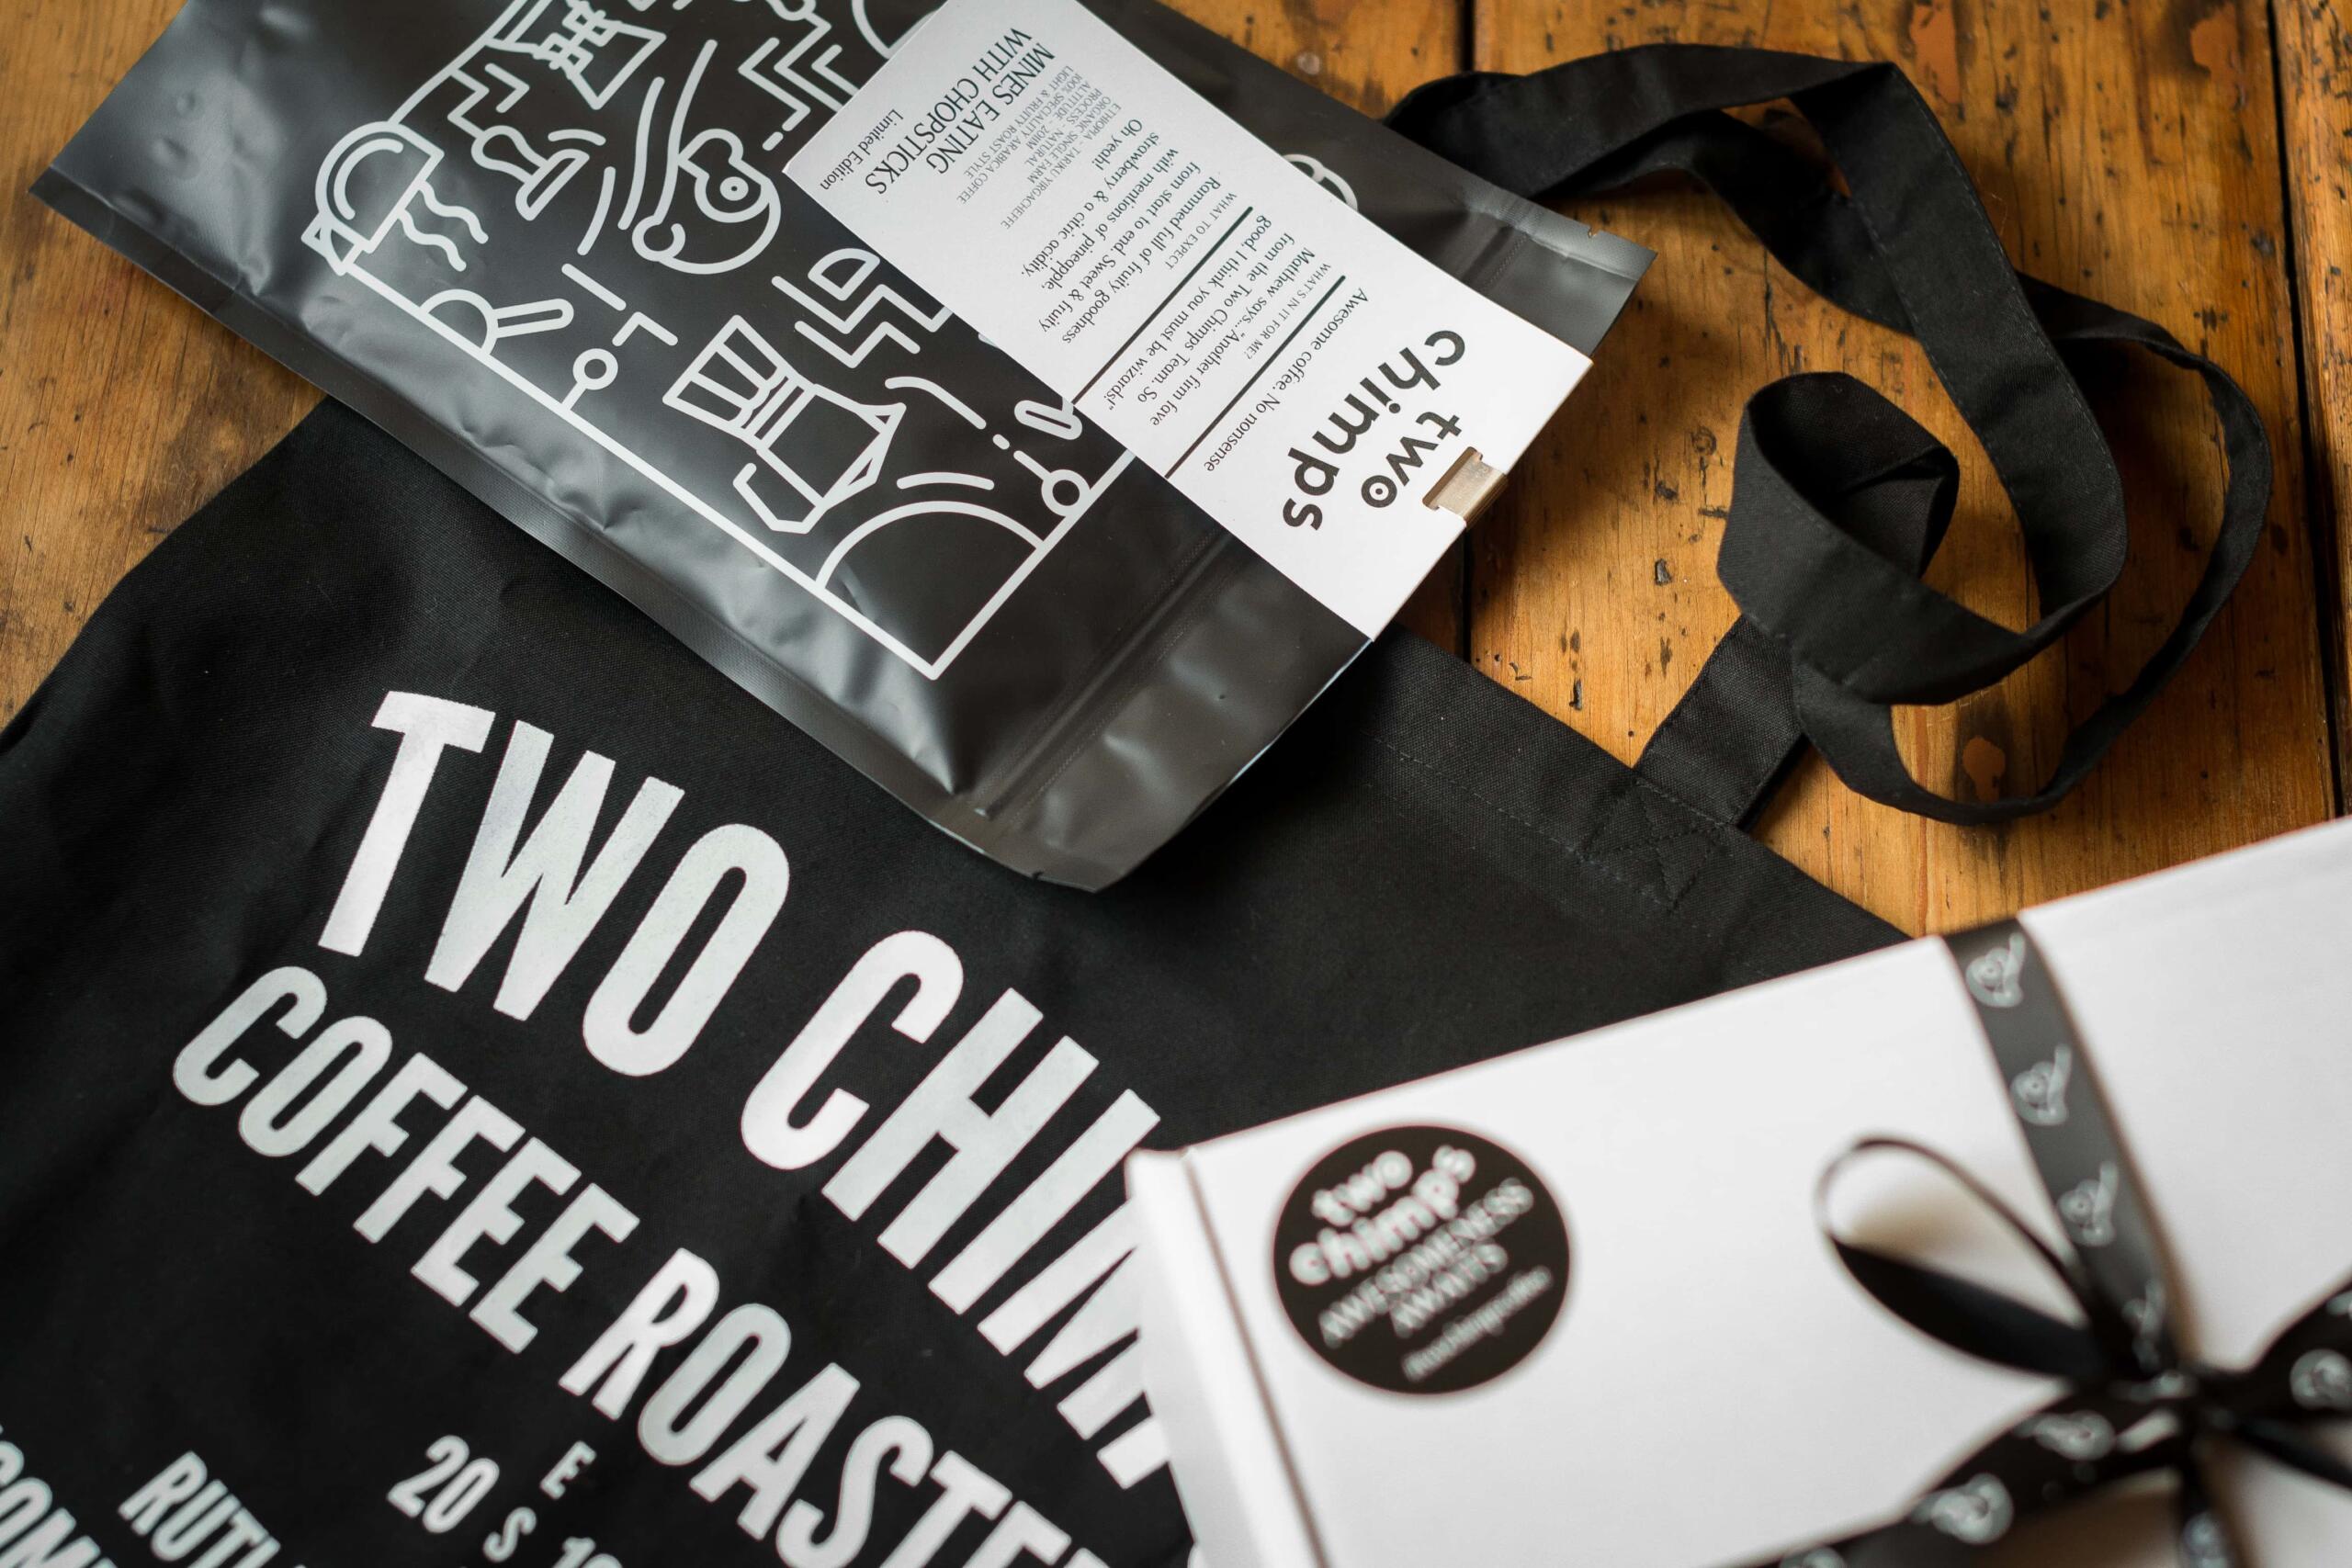 Two Chimps coffee gift with tote bag